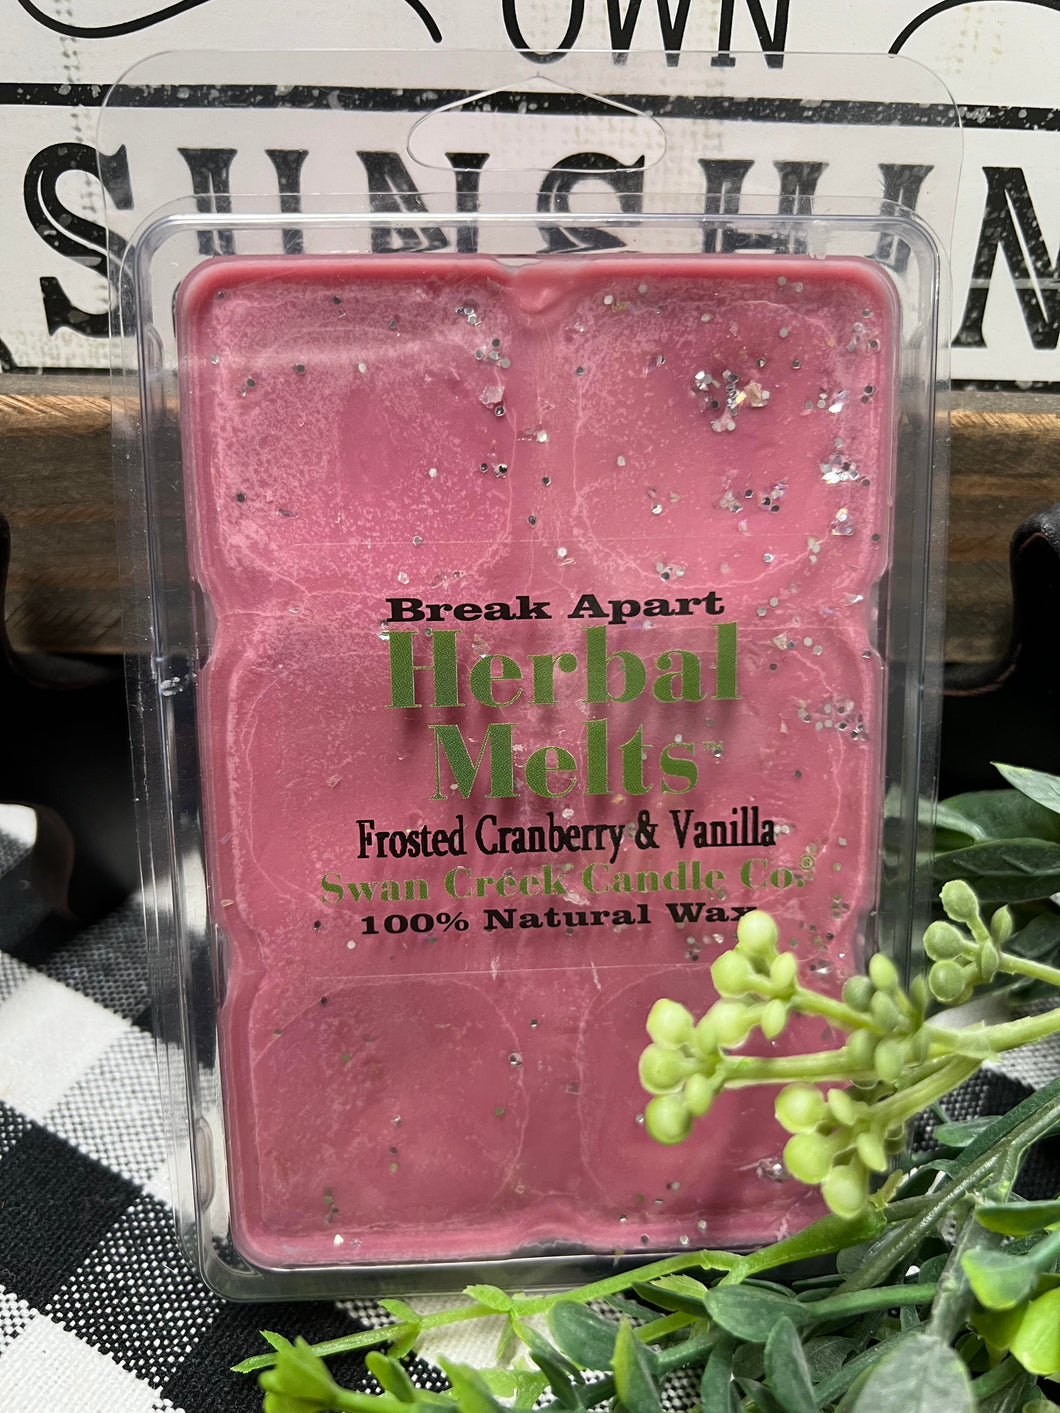 Swan Creek Candle Co. Frosted Cranberry & Vanilla Herbal Melts